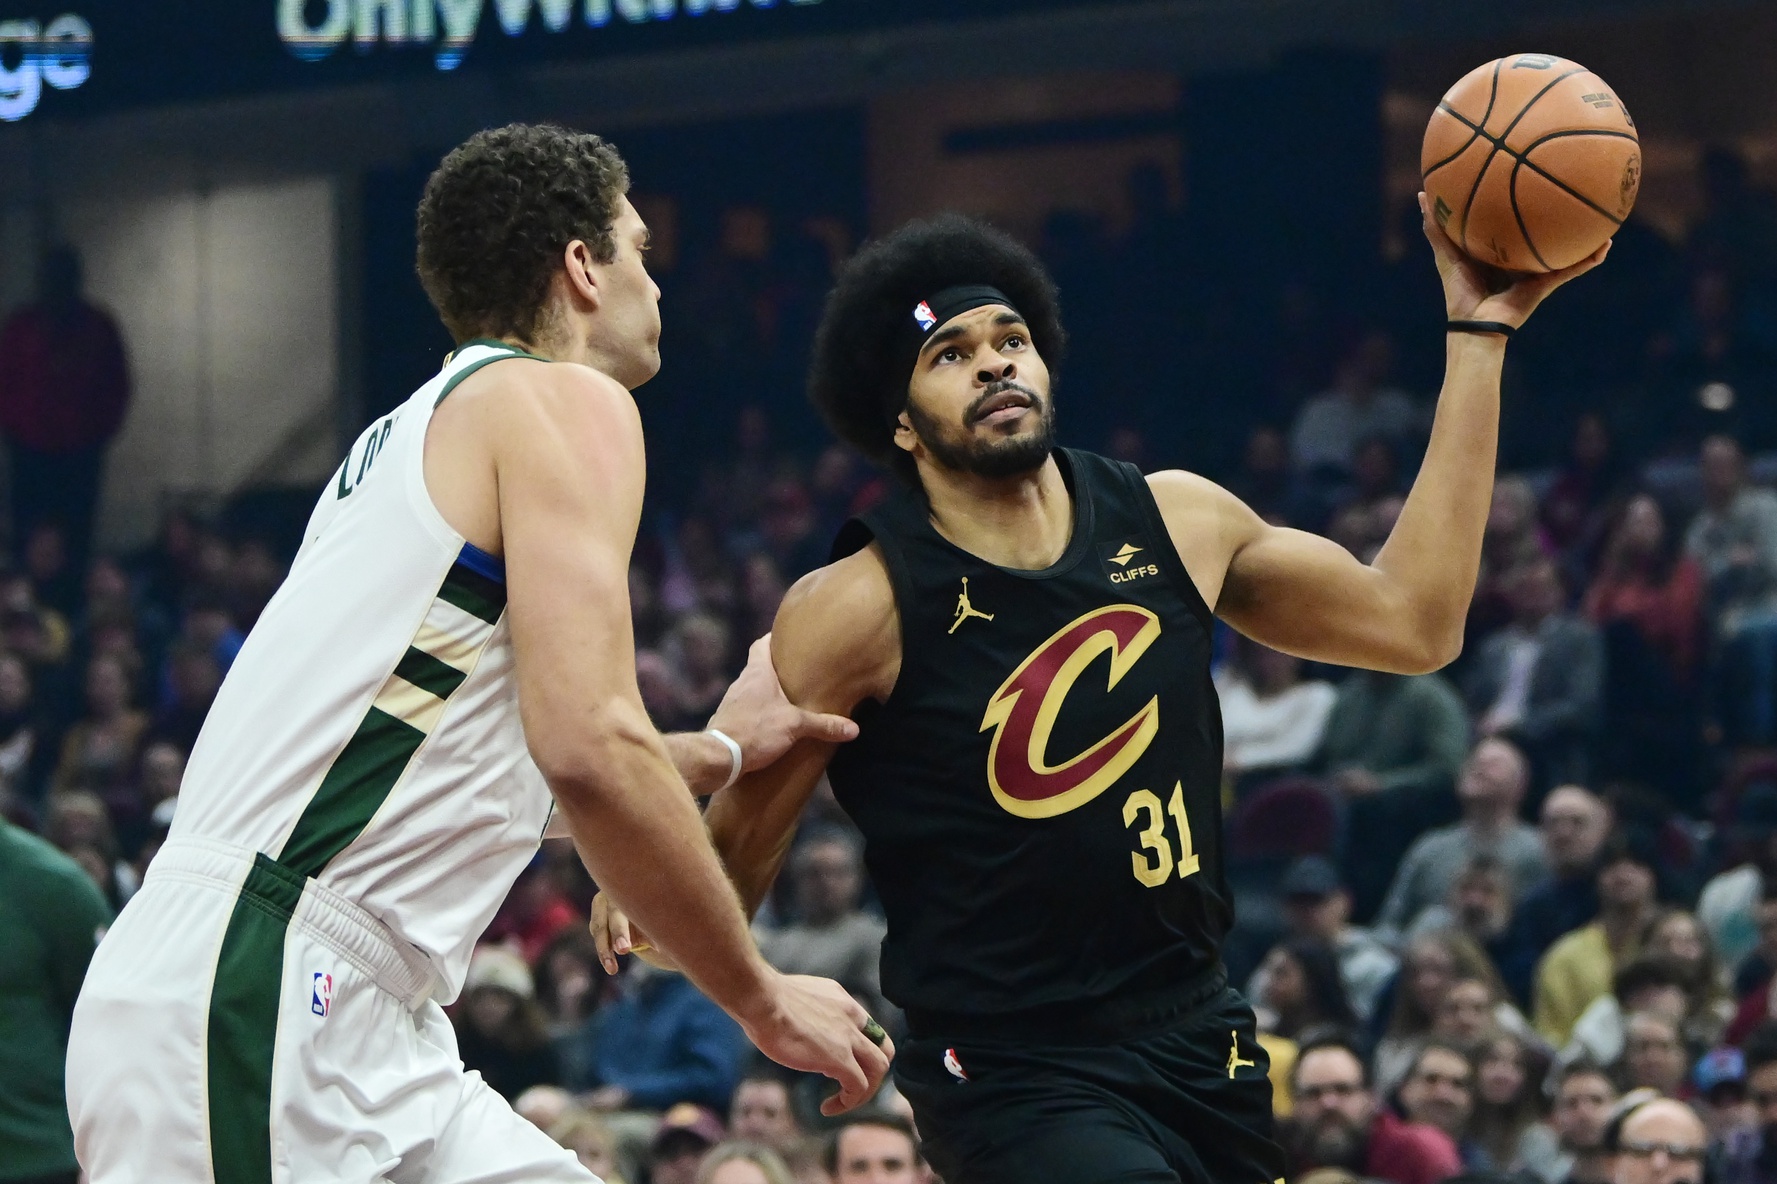 Dec 29, 2023; Cleveland, Ohio, USA; Cleveland Cavaliers center Jarrett Allen (31) drives to the basket against Milwaukee Bucks center Brook Lopez (11) during the first half at Rocket Mortgage FieldHouse. Mandatory Credit: Ken Blaze-USA TODAY Sports